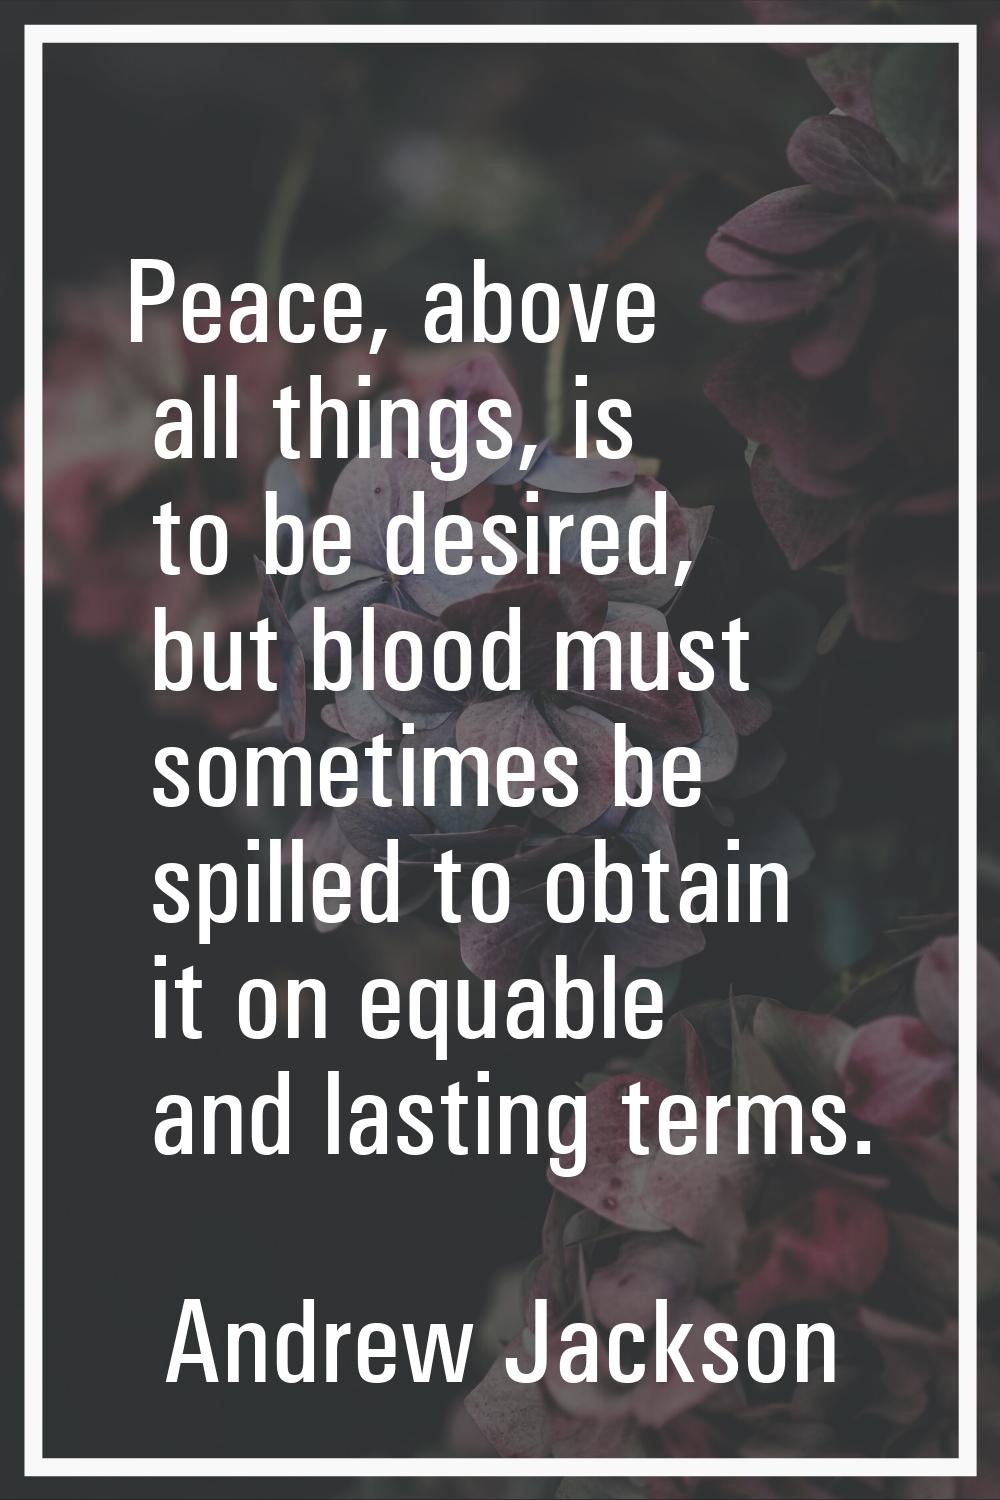 Peace, above all things, is to be desired, but blood must sometimes be spilled to obtain it on equa